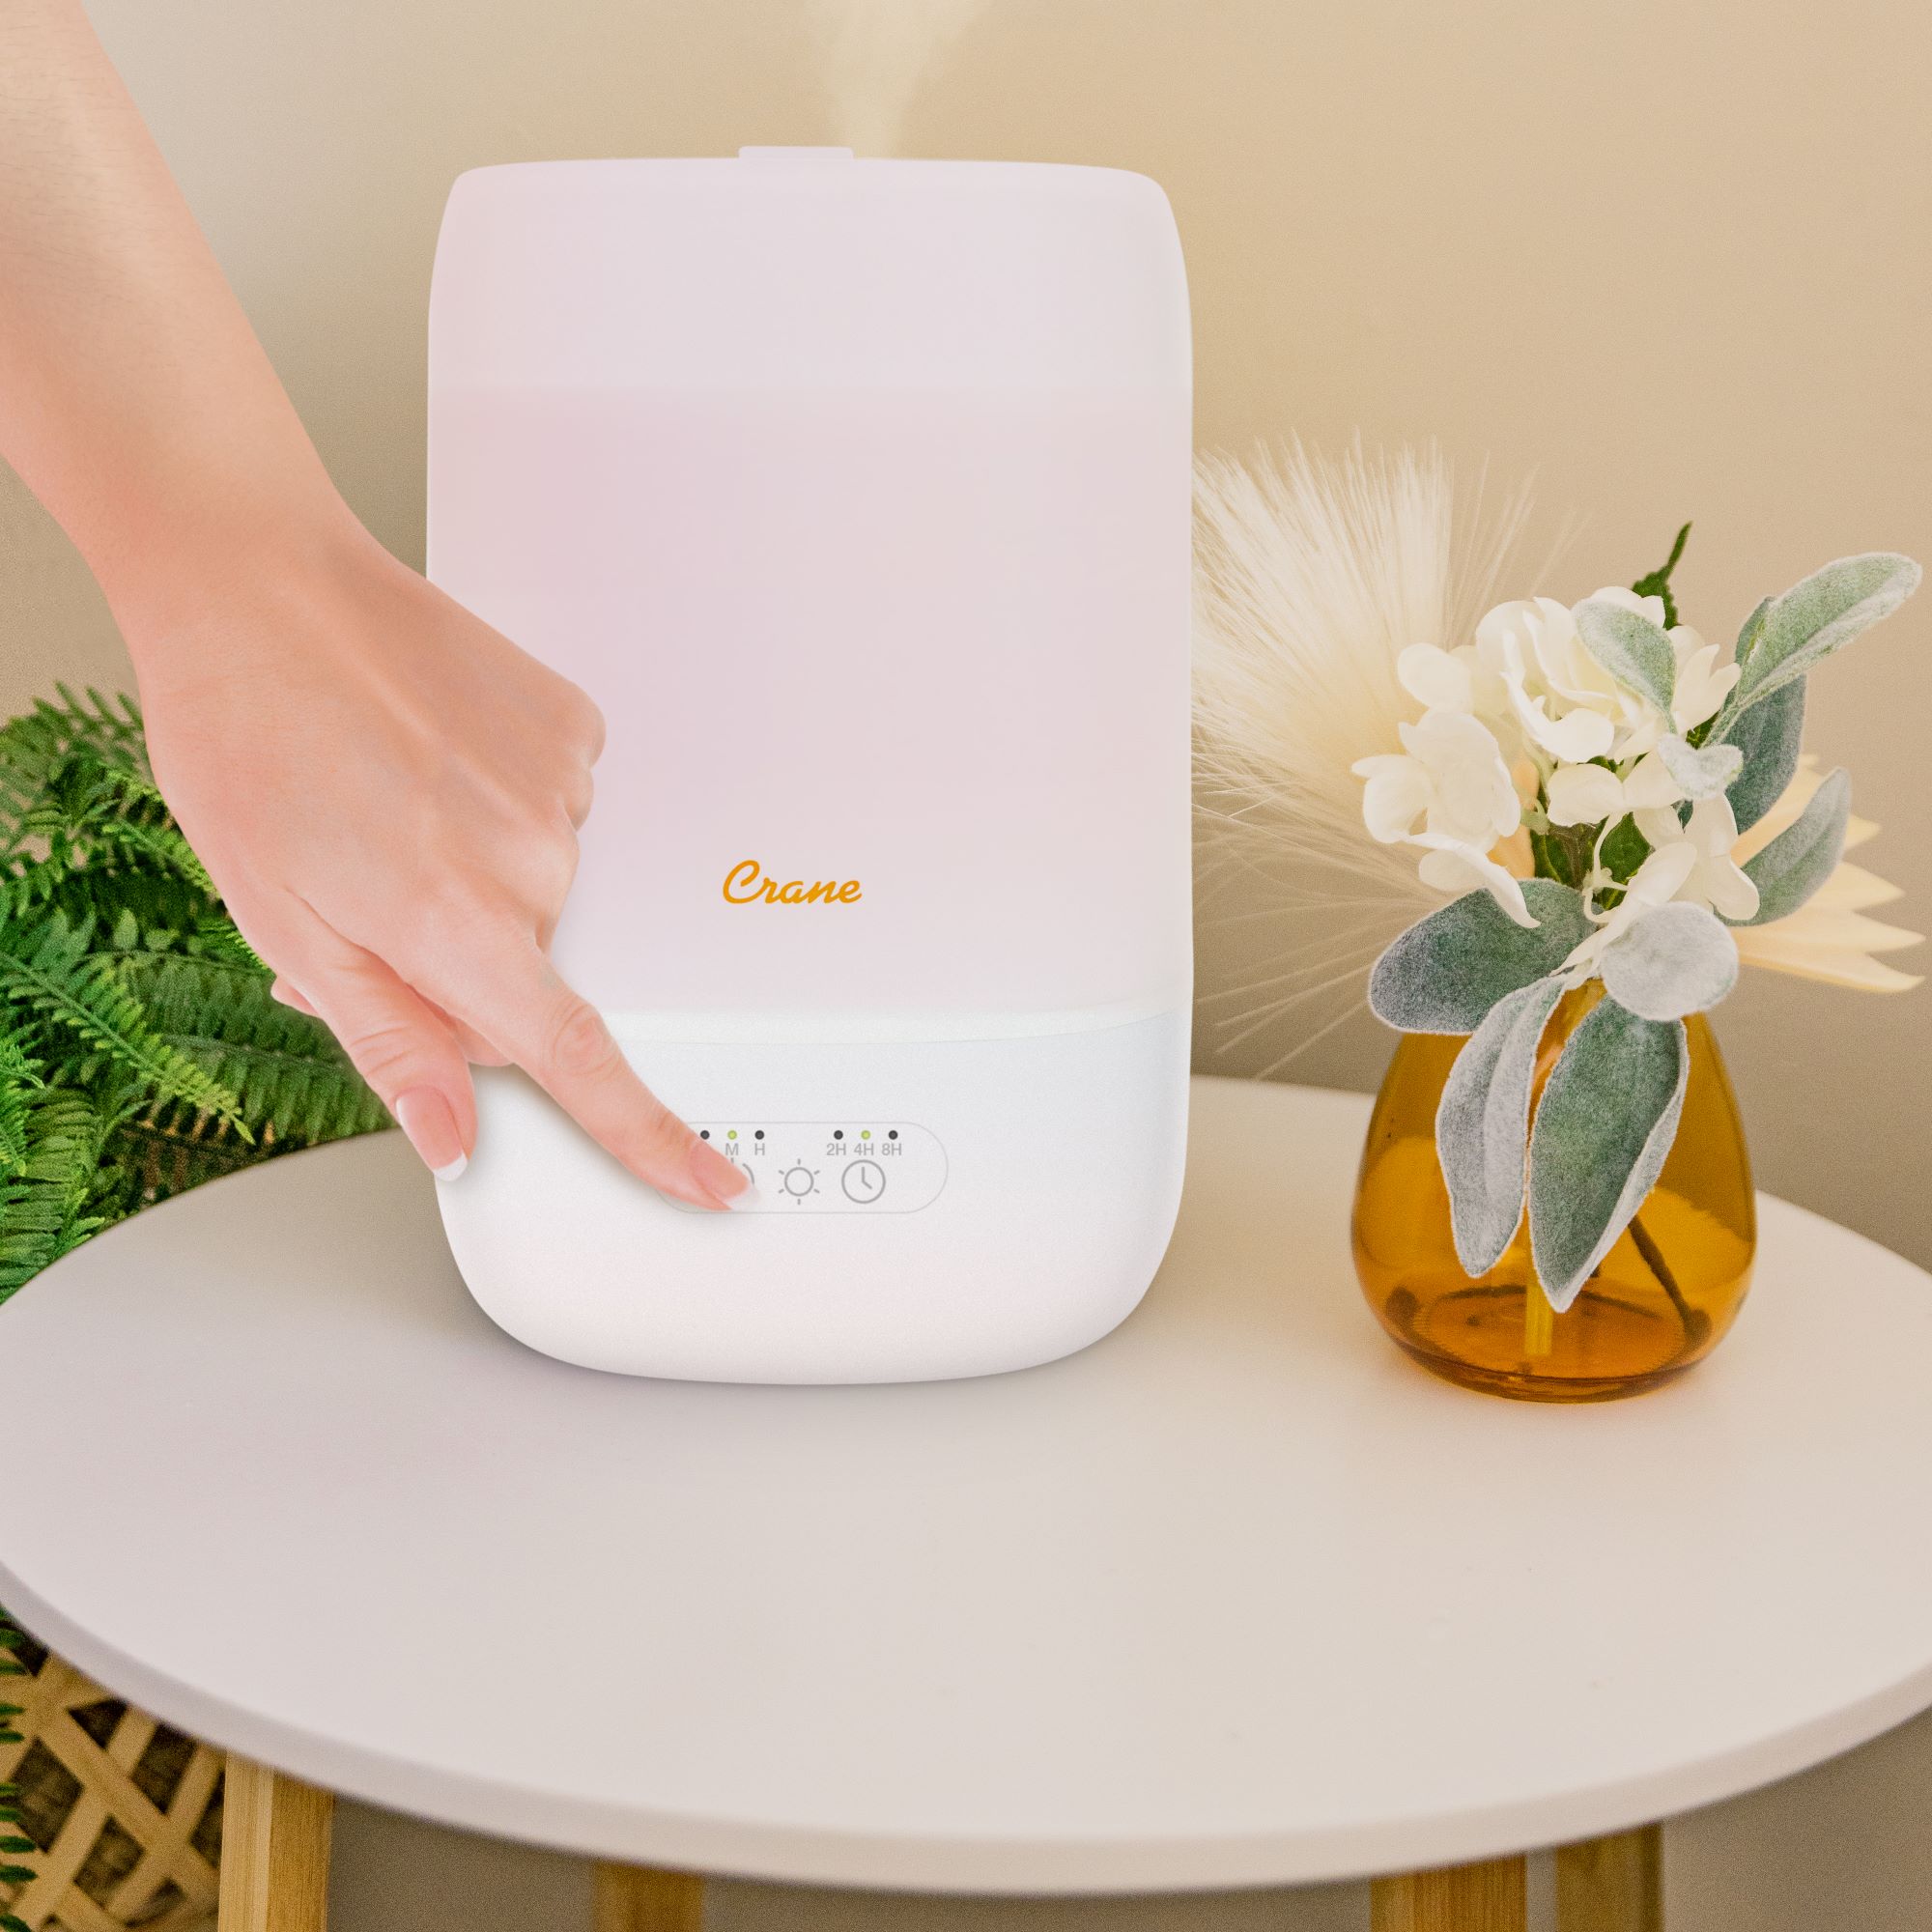 Cool Mist Top Fill Humidifier & Aroma Diffuser